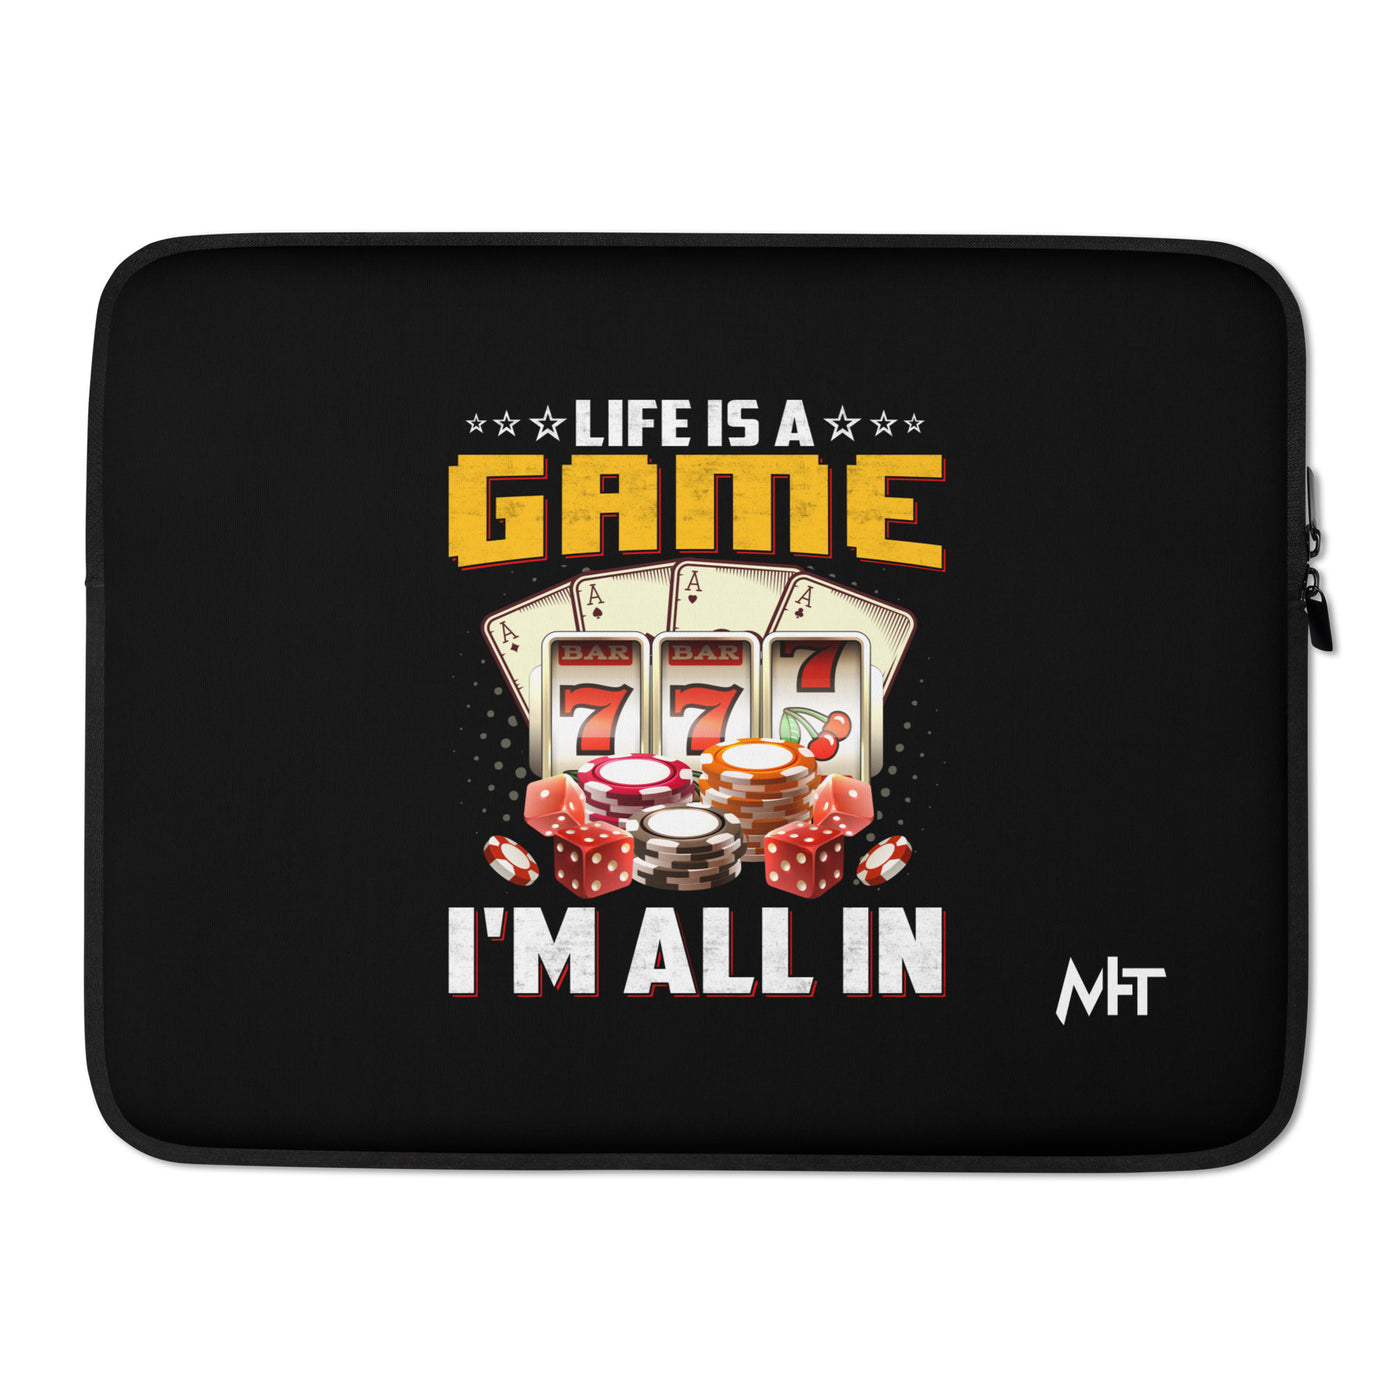 Life is a Game: I'm all in - Laptop Sleeve